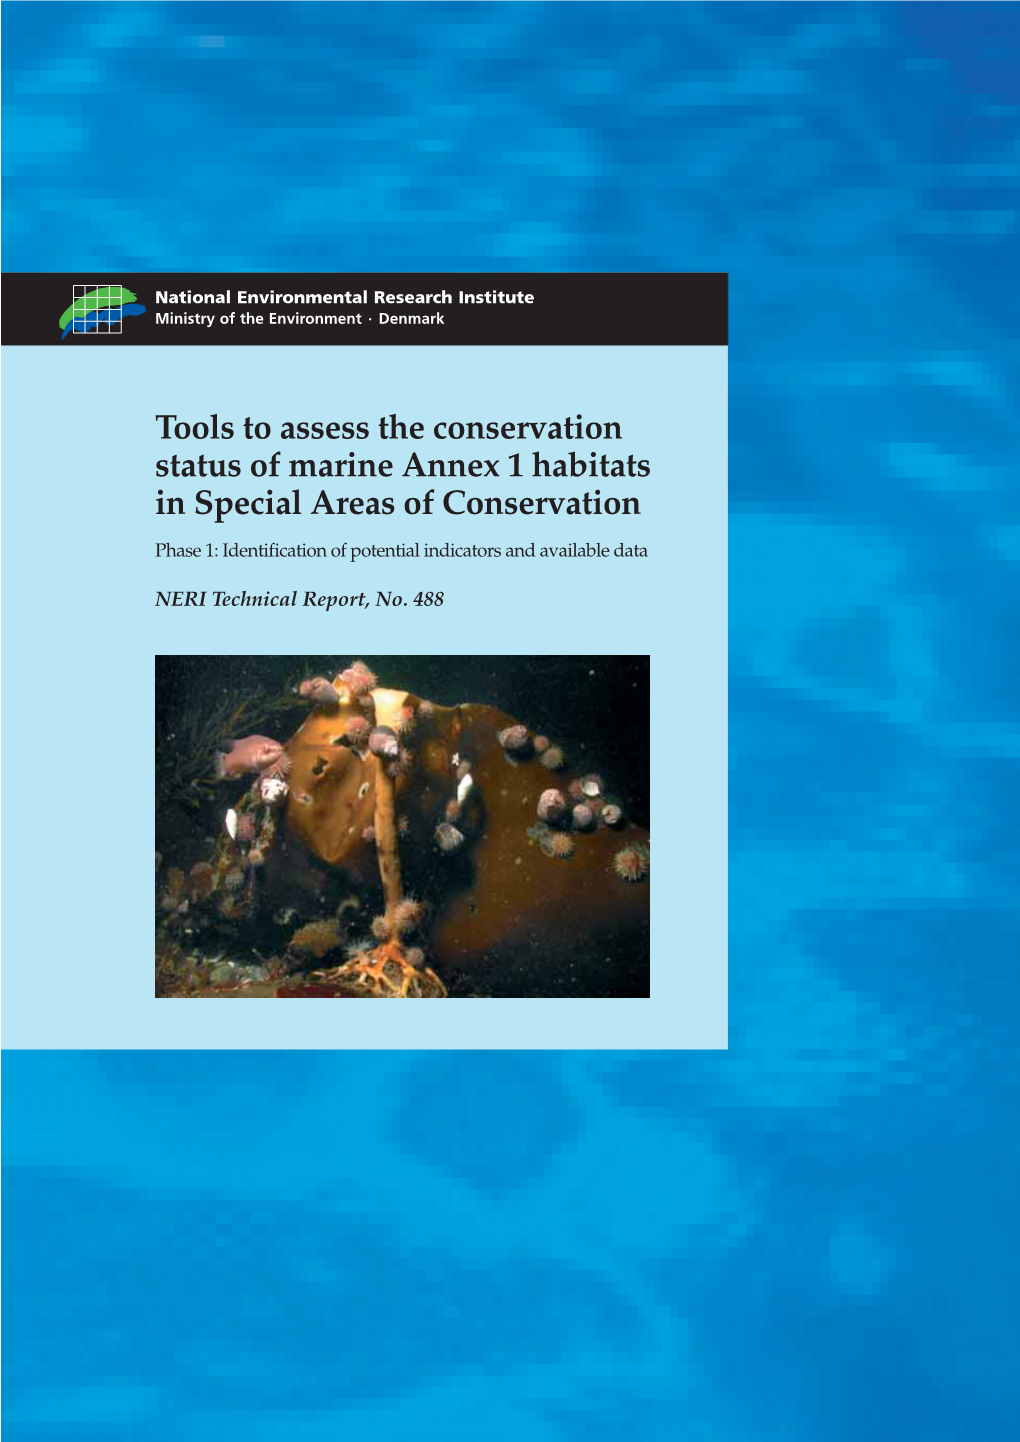 Tools to Assess the Conservation Status of Marine Annex 1 Habitats In